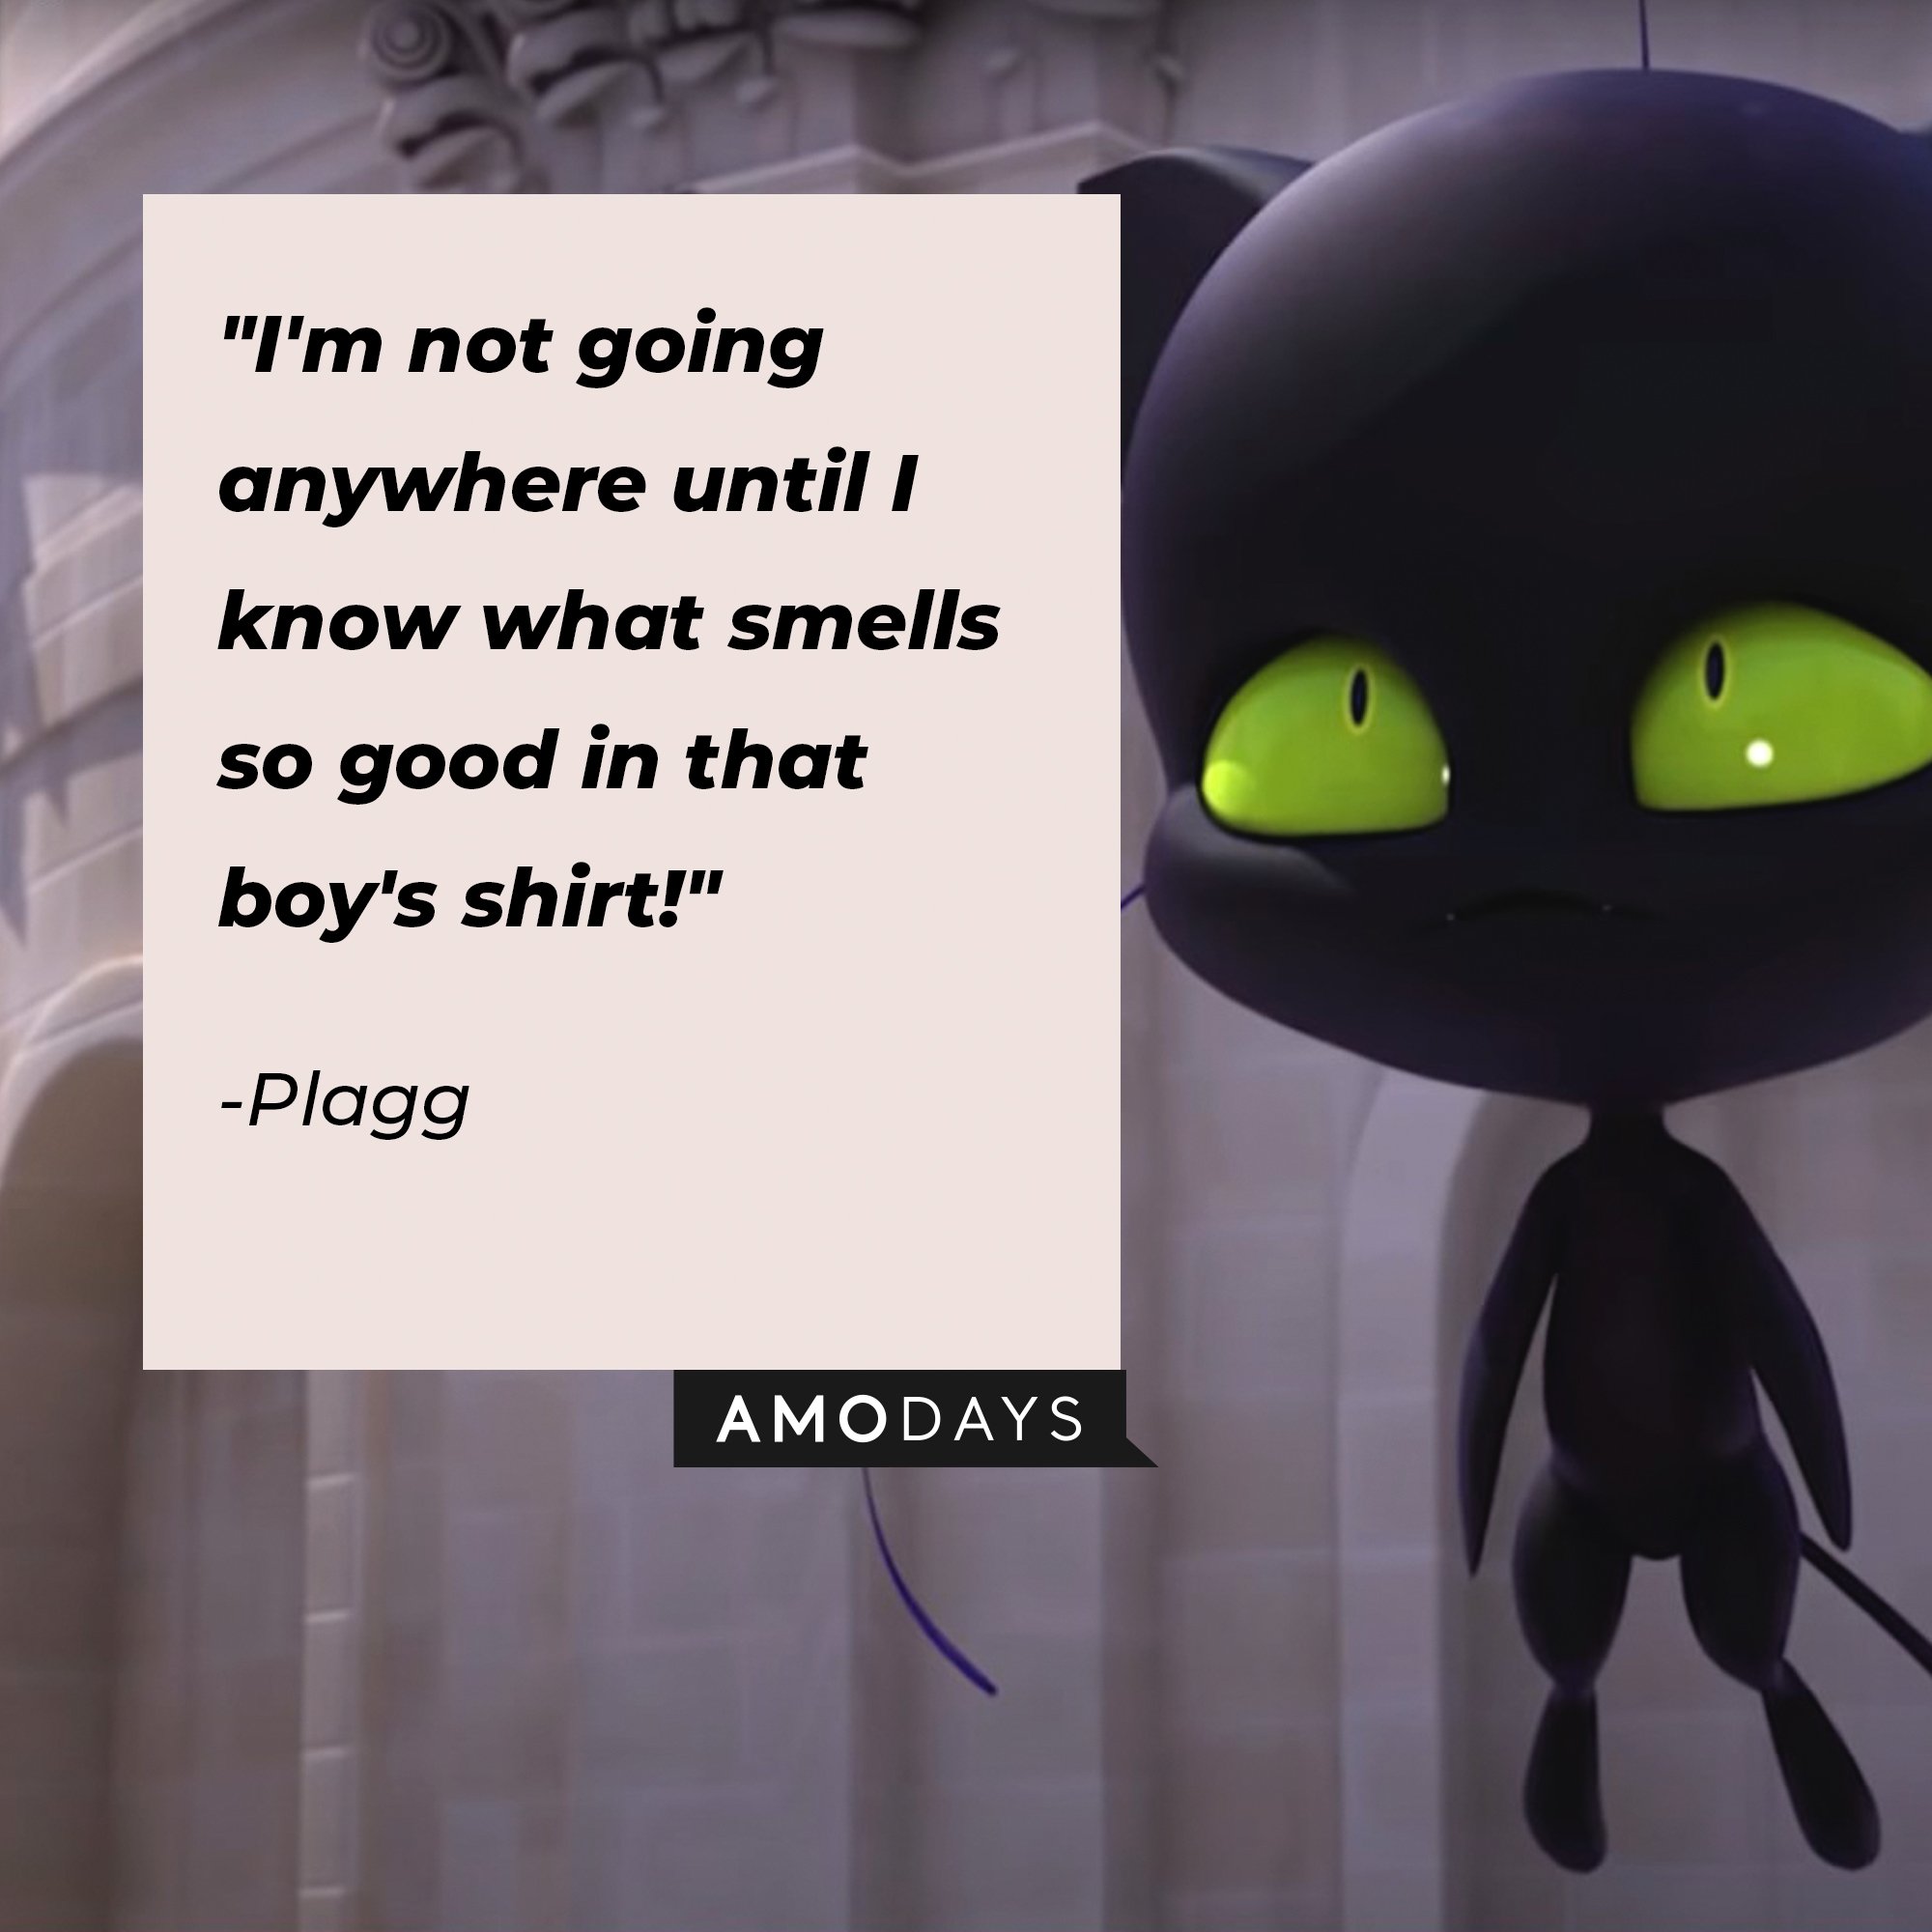  Plagg’s quote: "I'm not going anywhere until I know what smells so good in that boy's shirt!" | Image: AmoDays